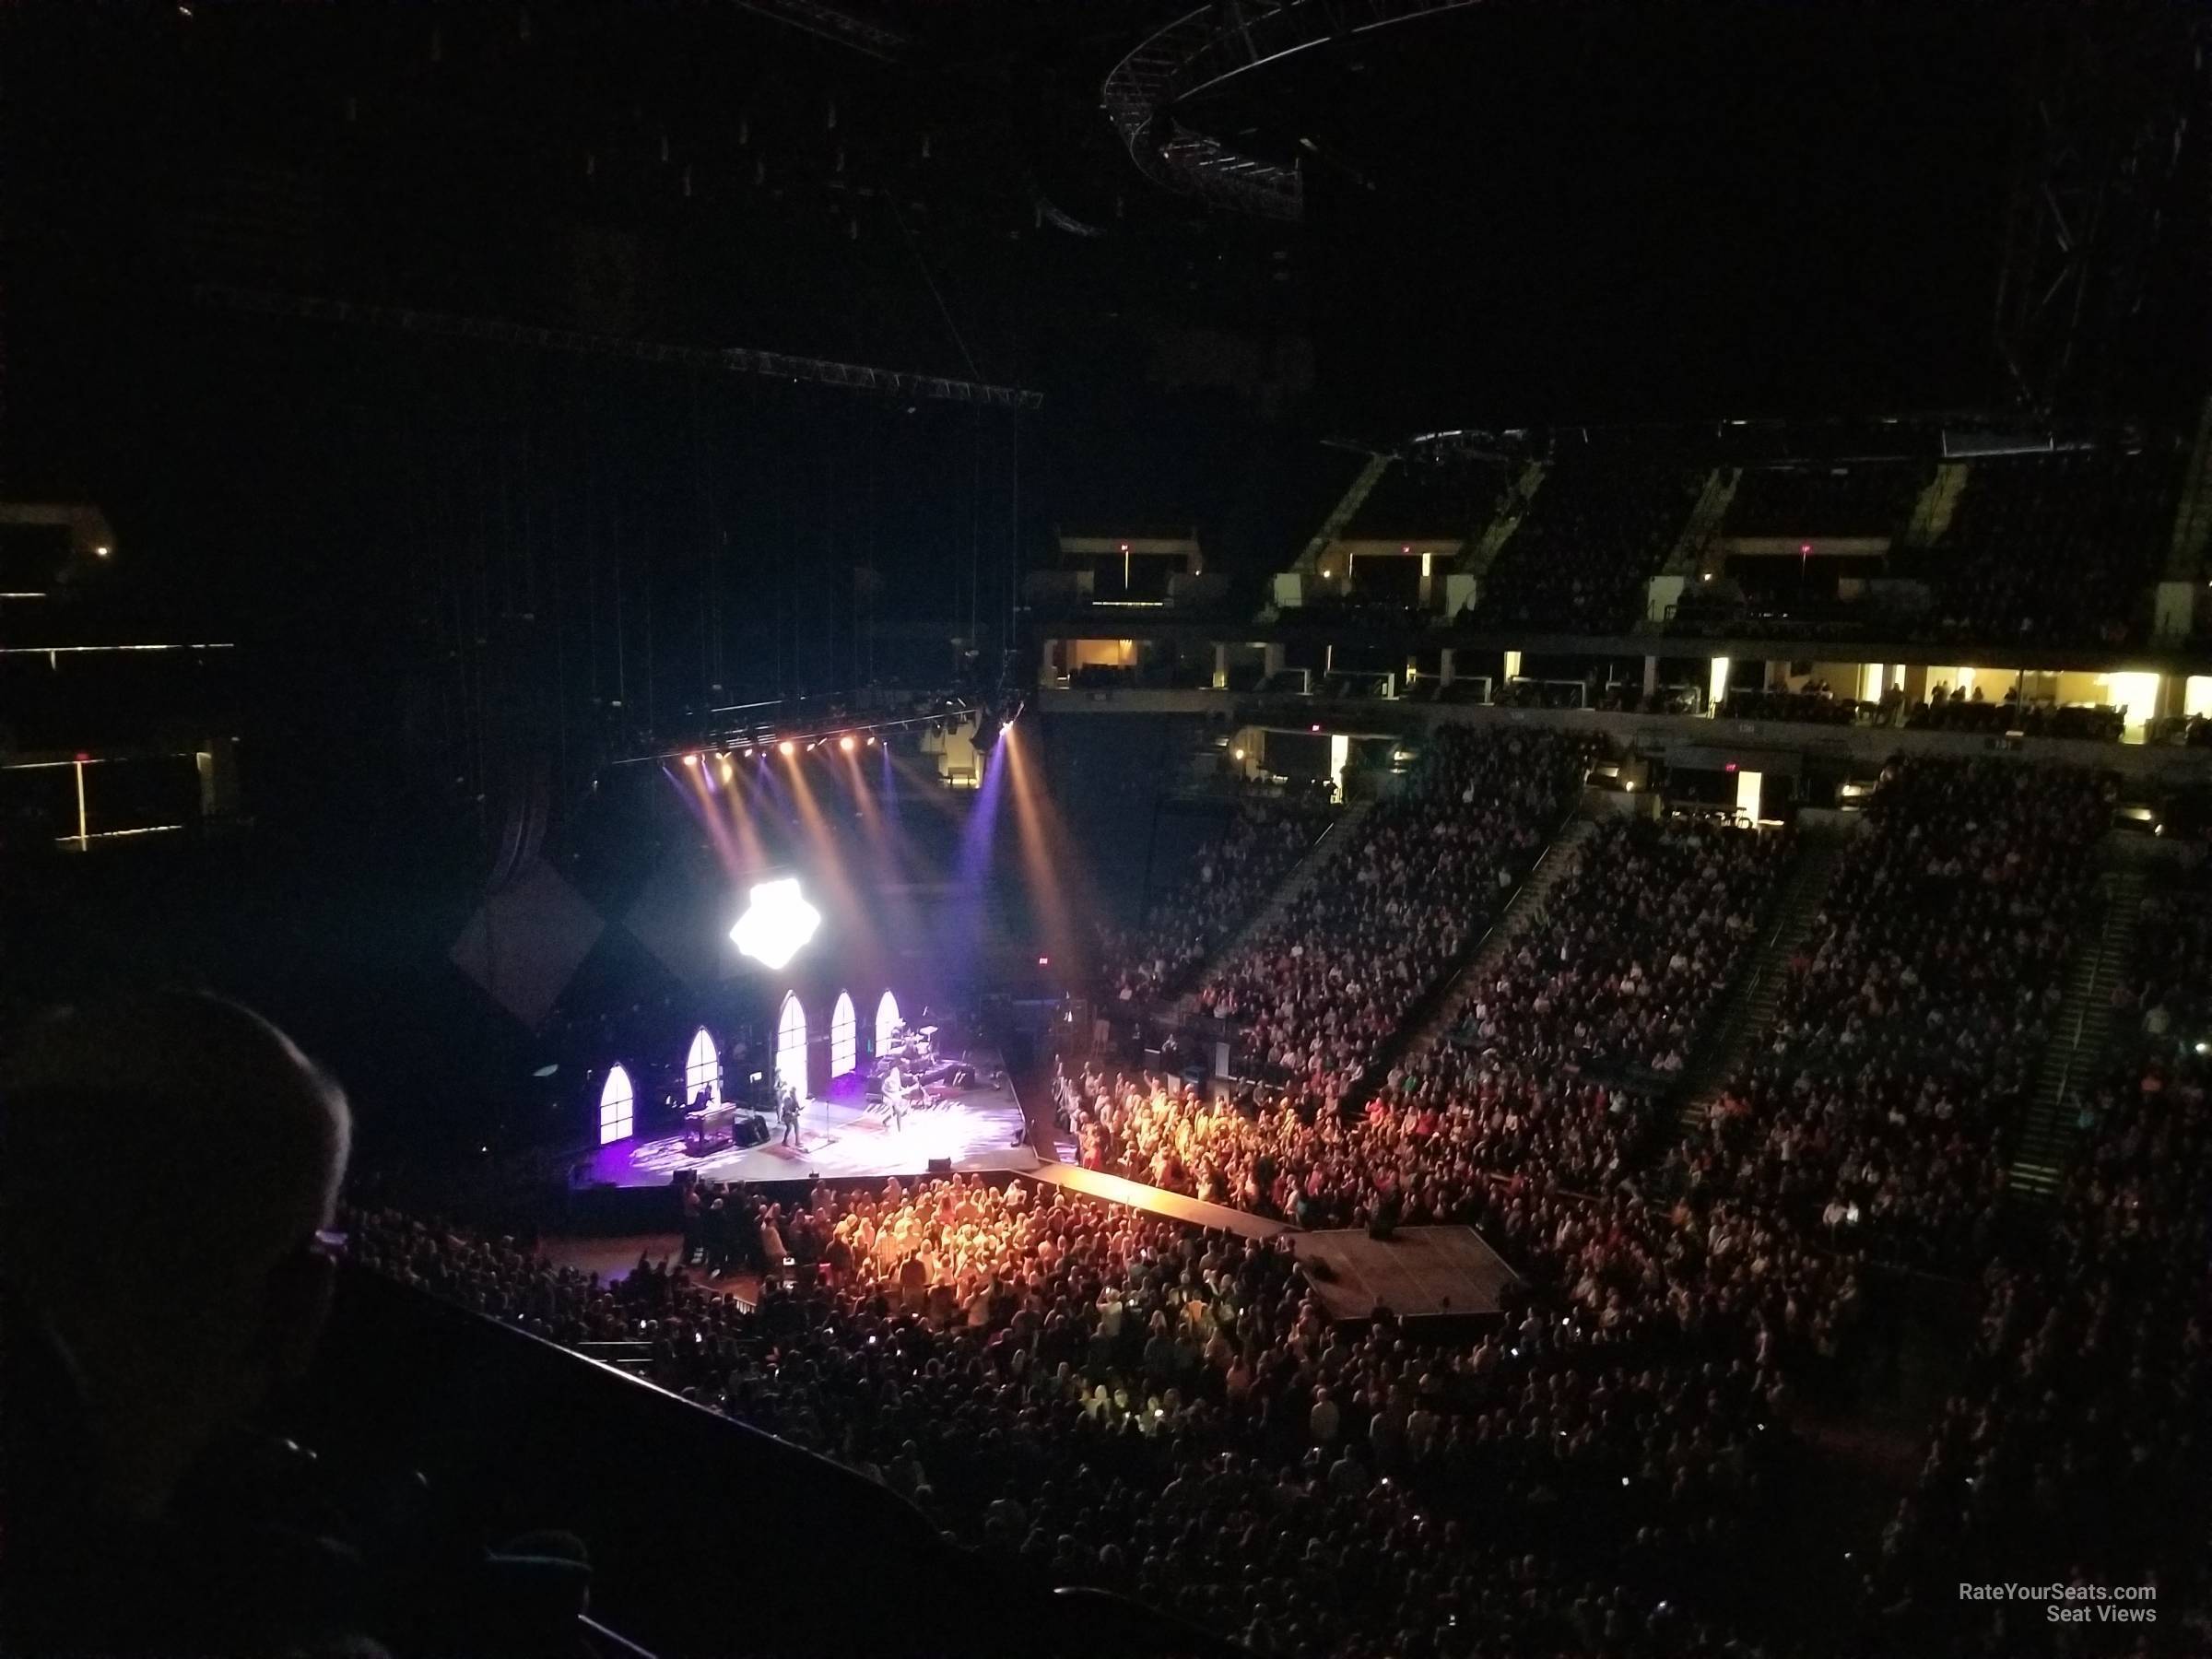 Section 210 at Target Center for Concerts - RateYourSeats.com